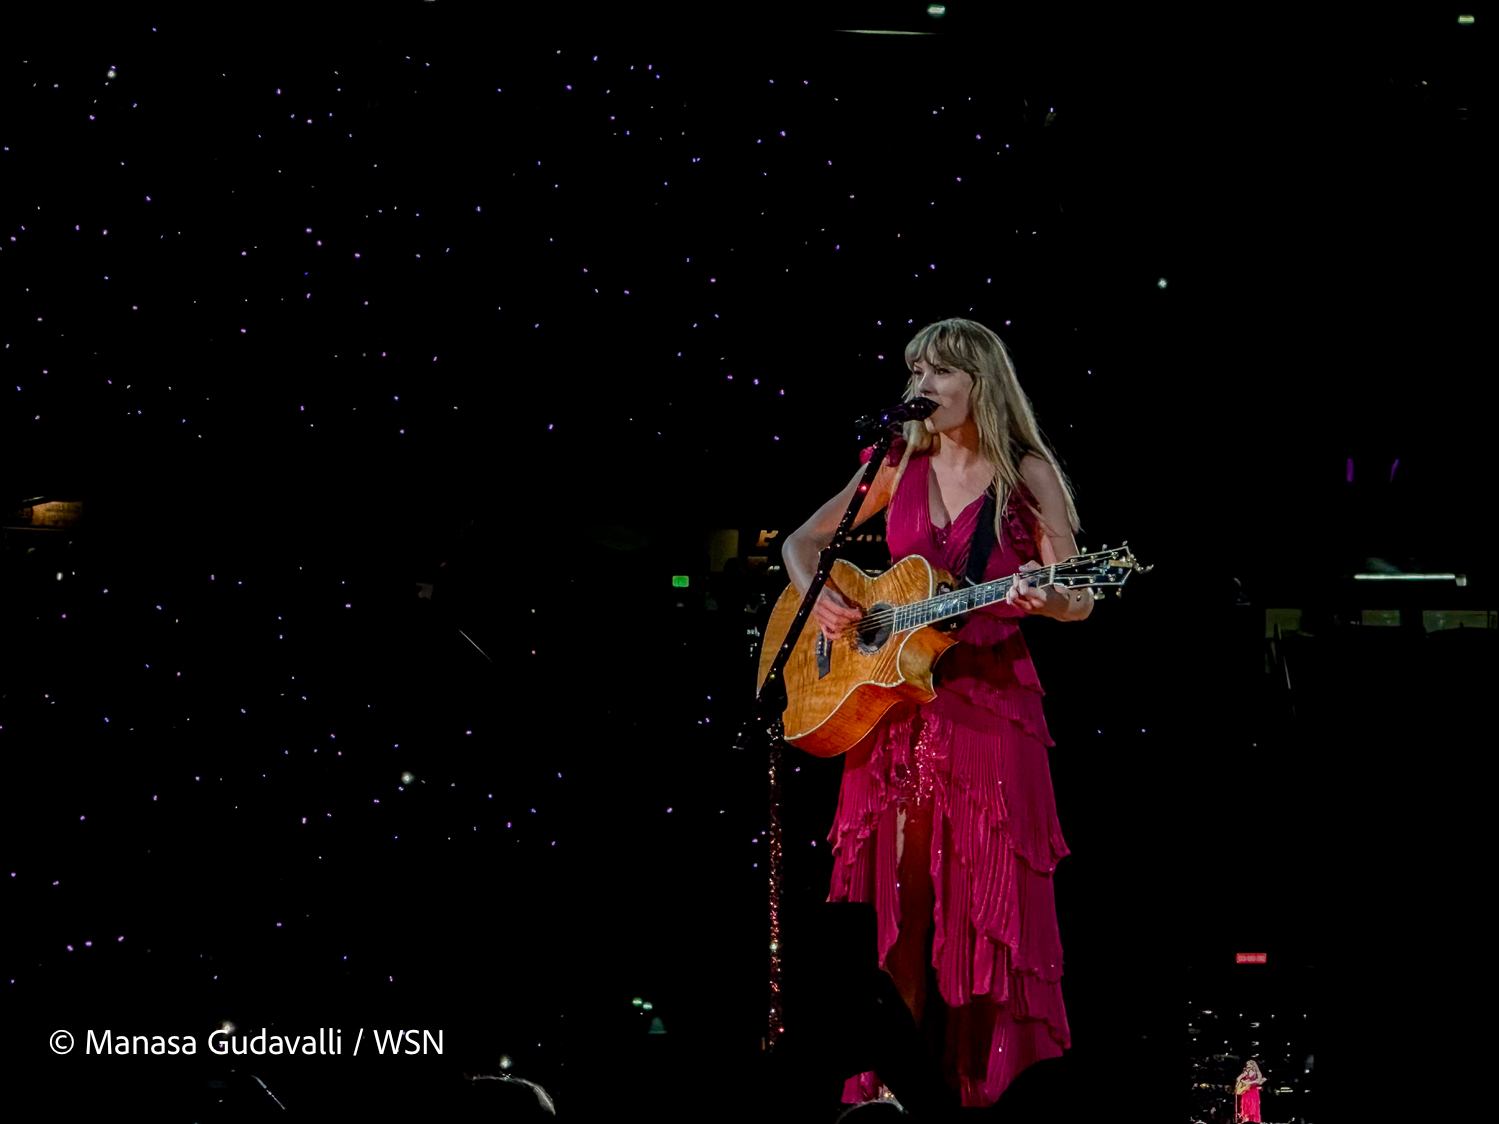 Taylor Swift performs before a screen background that is black with white stars, standing with a guitar in hand. Swift wears a hot pink mid-length dress with layered ruffles as she sings into a standing microphone.